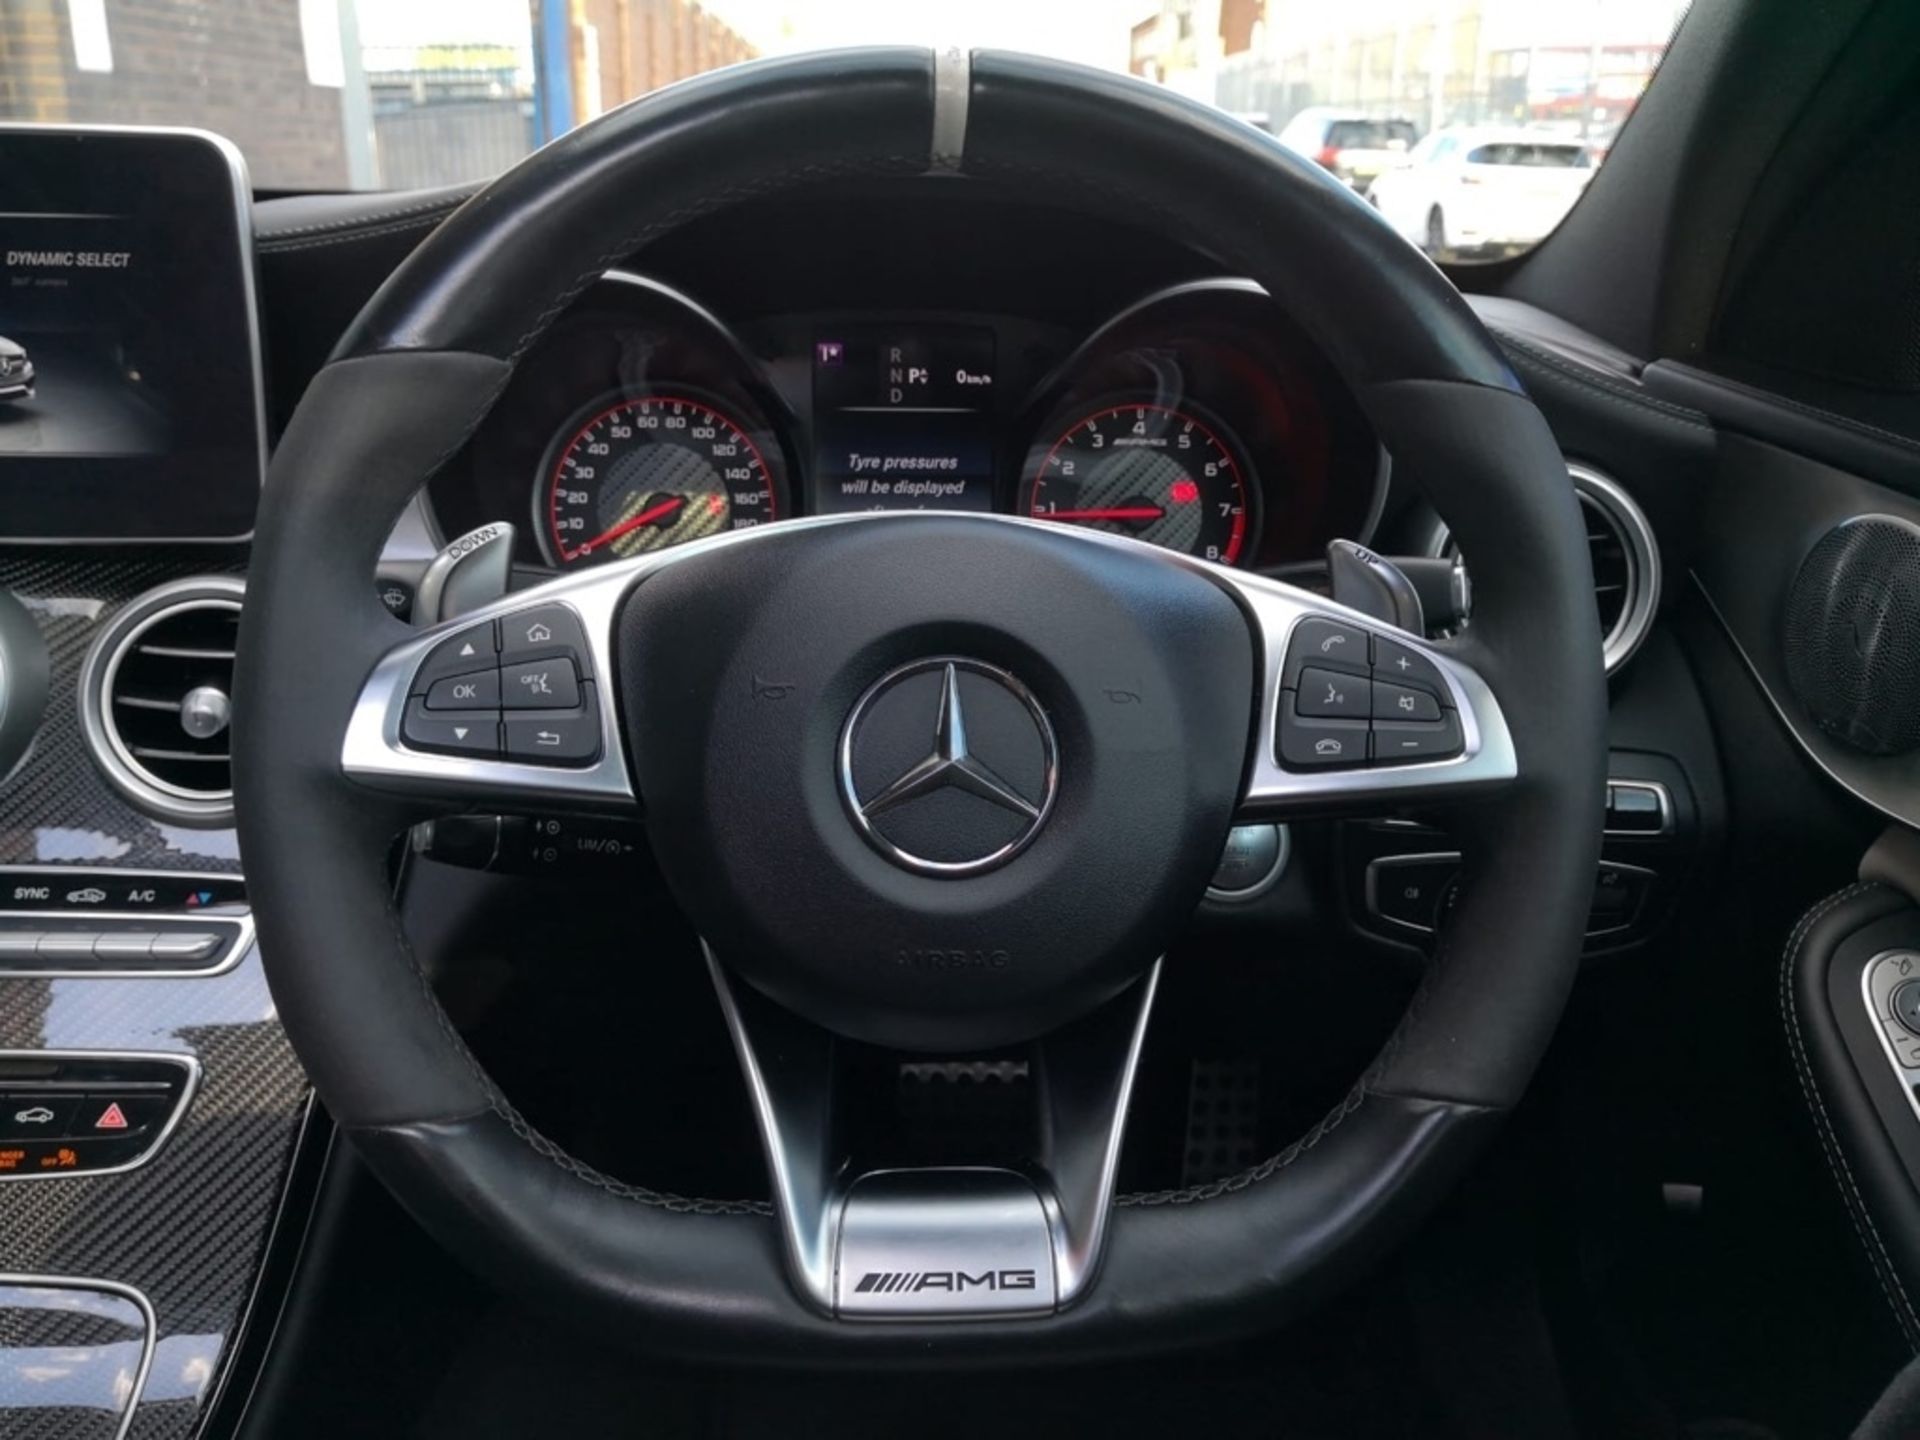 Mercedes-Benz C Class 4.0 C63 AMG S 4 Dr – Automatic – Petrol – Wrapped White Reg: PW15 AMG - 2015 - Image 5 of 8